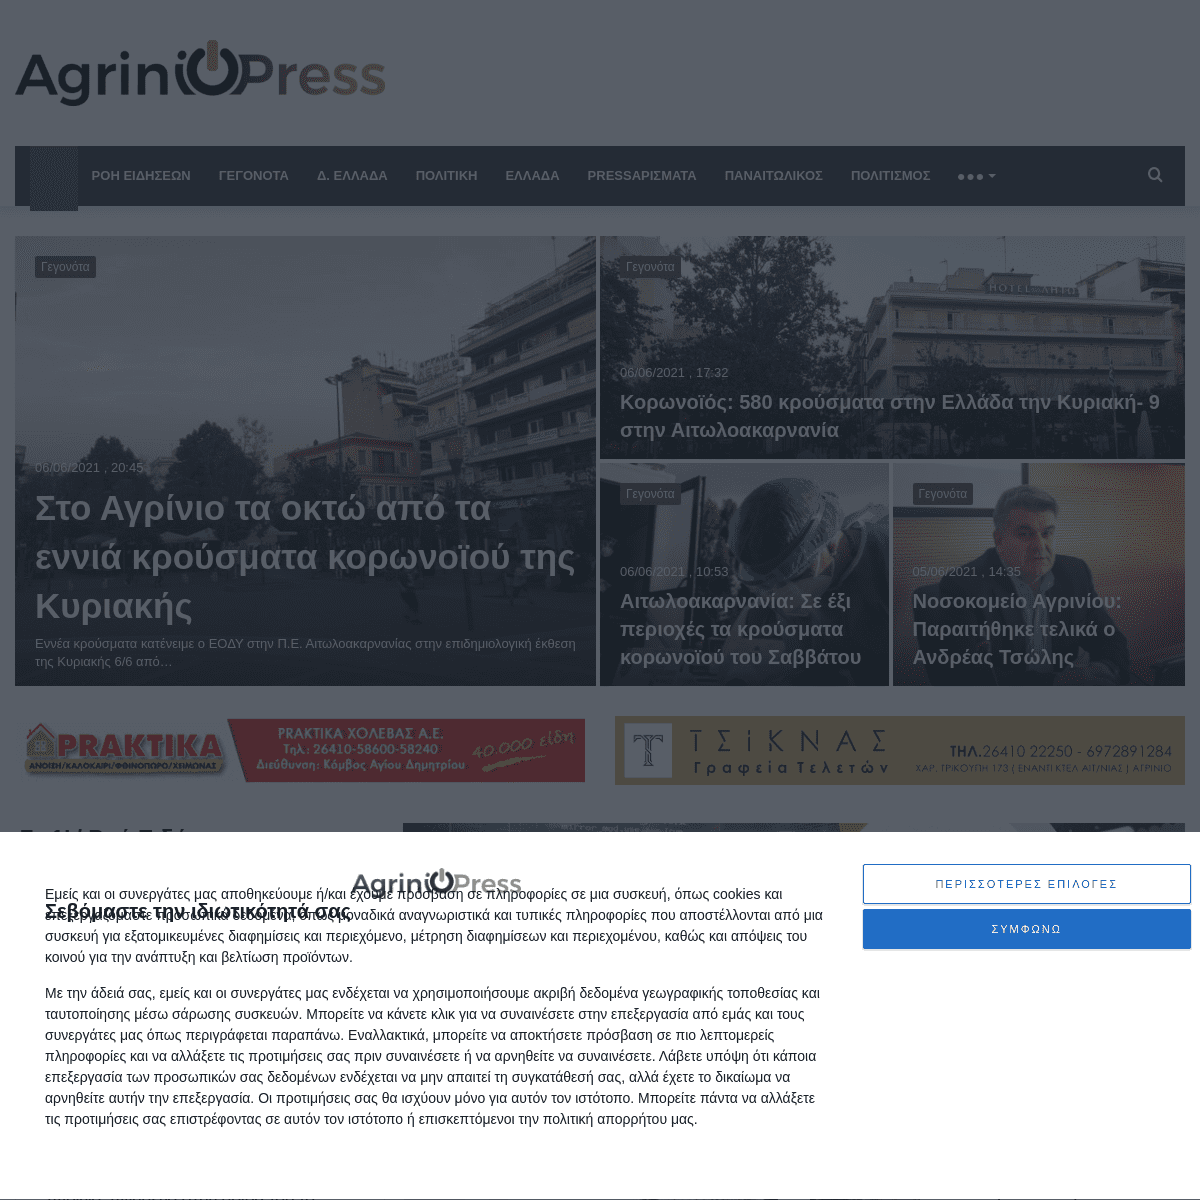 A complete backup of https://agriniopress.gr